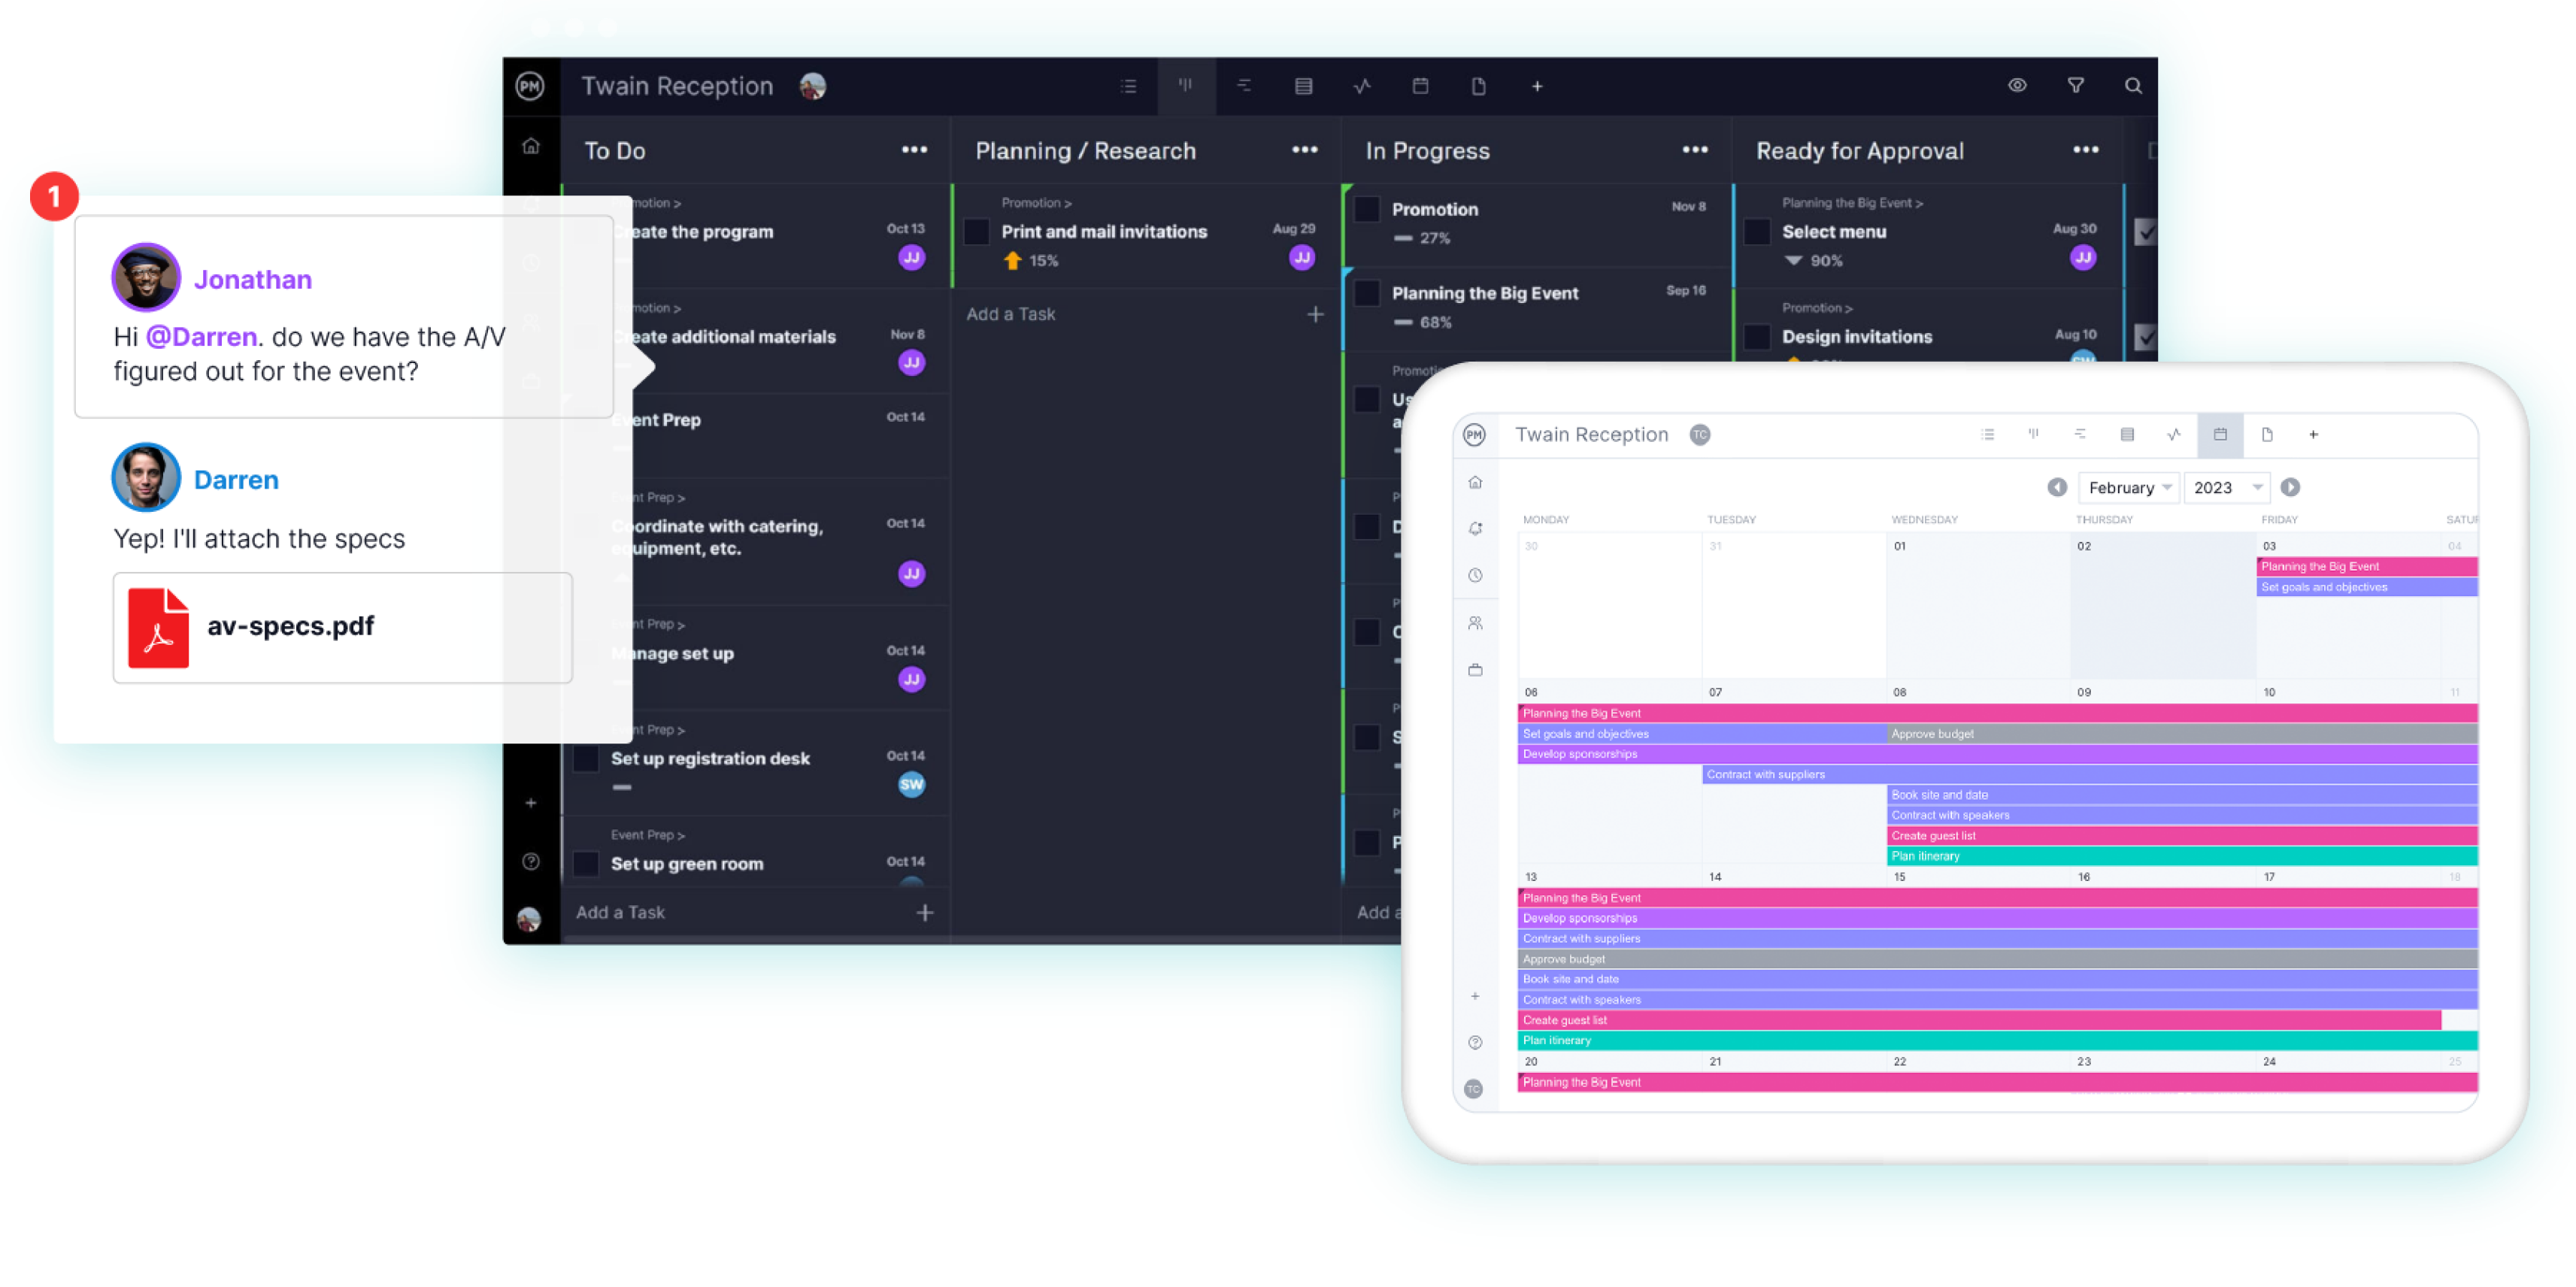 Event project management software with an event calendar, kanban board and chat window